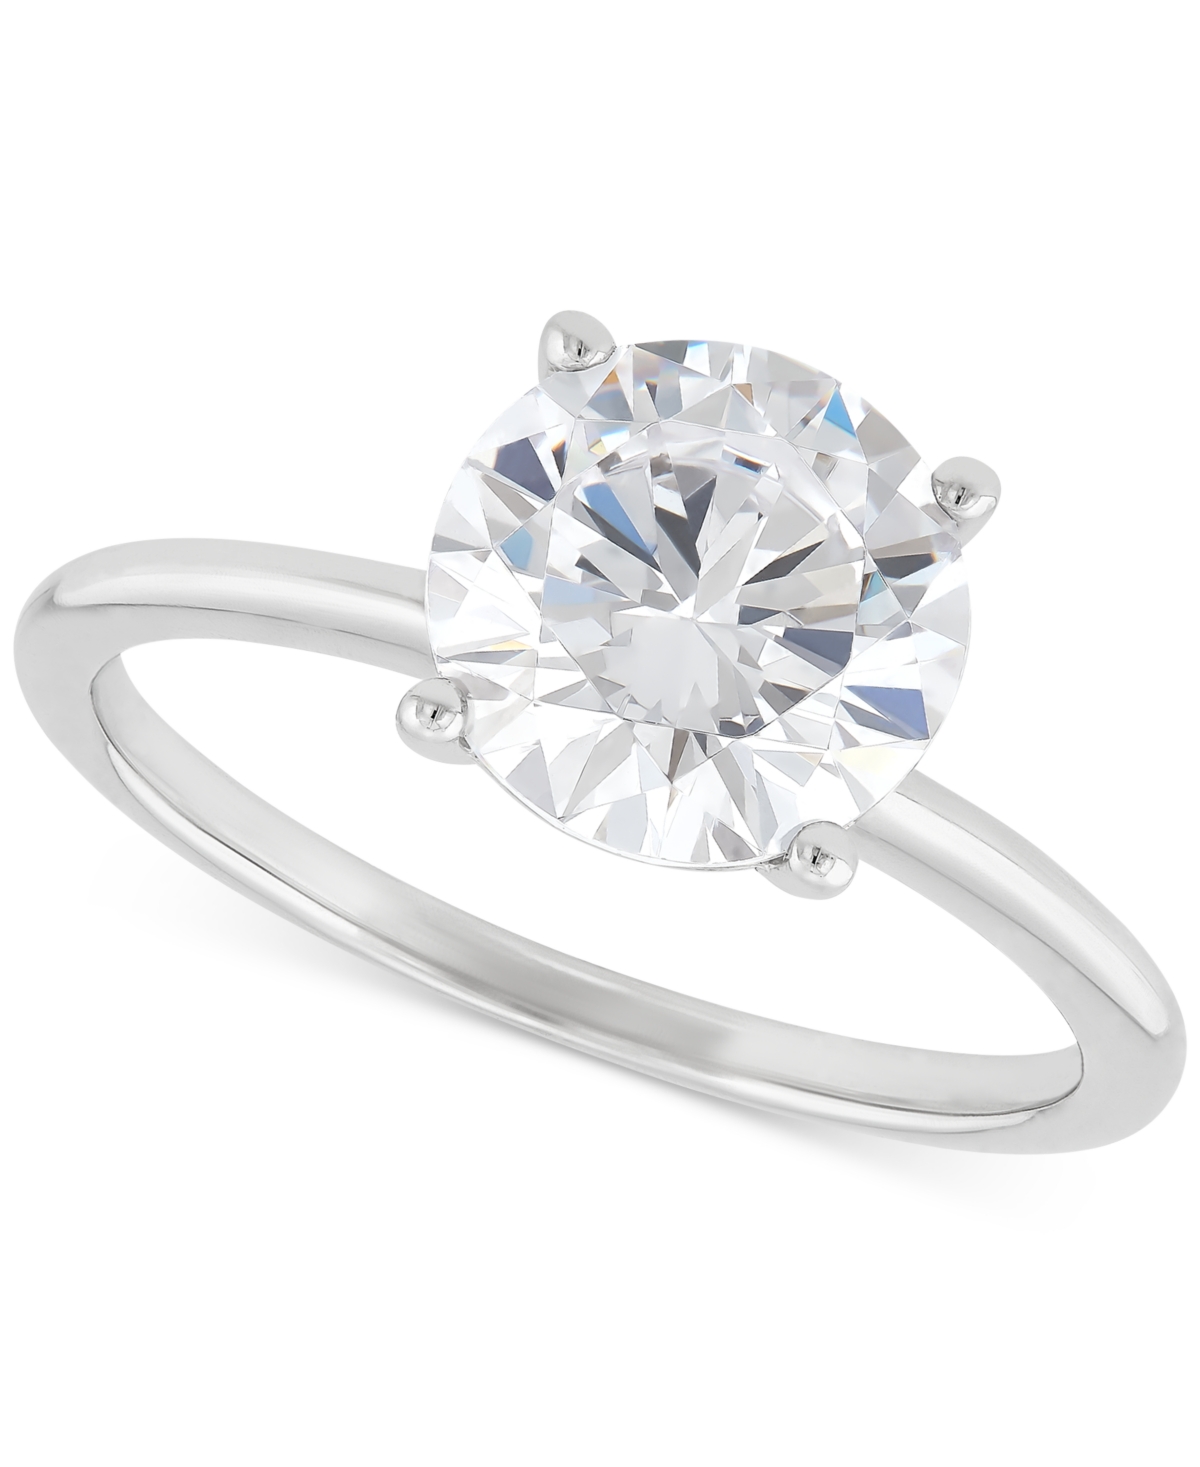 Grown With Love Igi Certified Lab Grown Diamond Solitaire Engagement Ring (2-1/2 ct. t.w.) in 14k White Gold or 14k Gold & White Gold